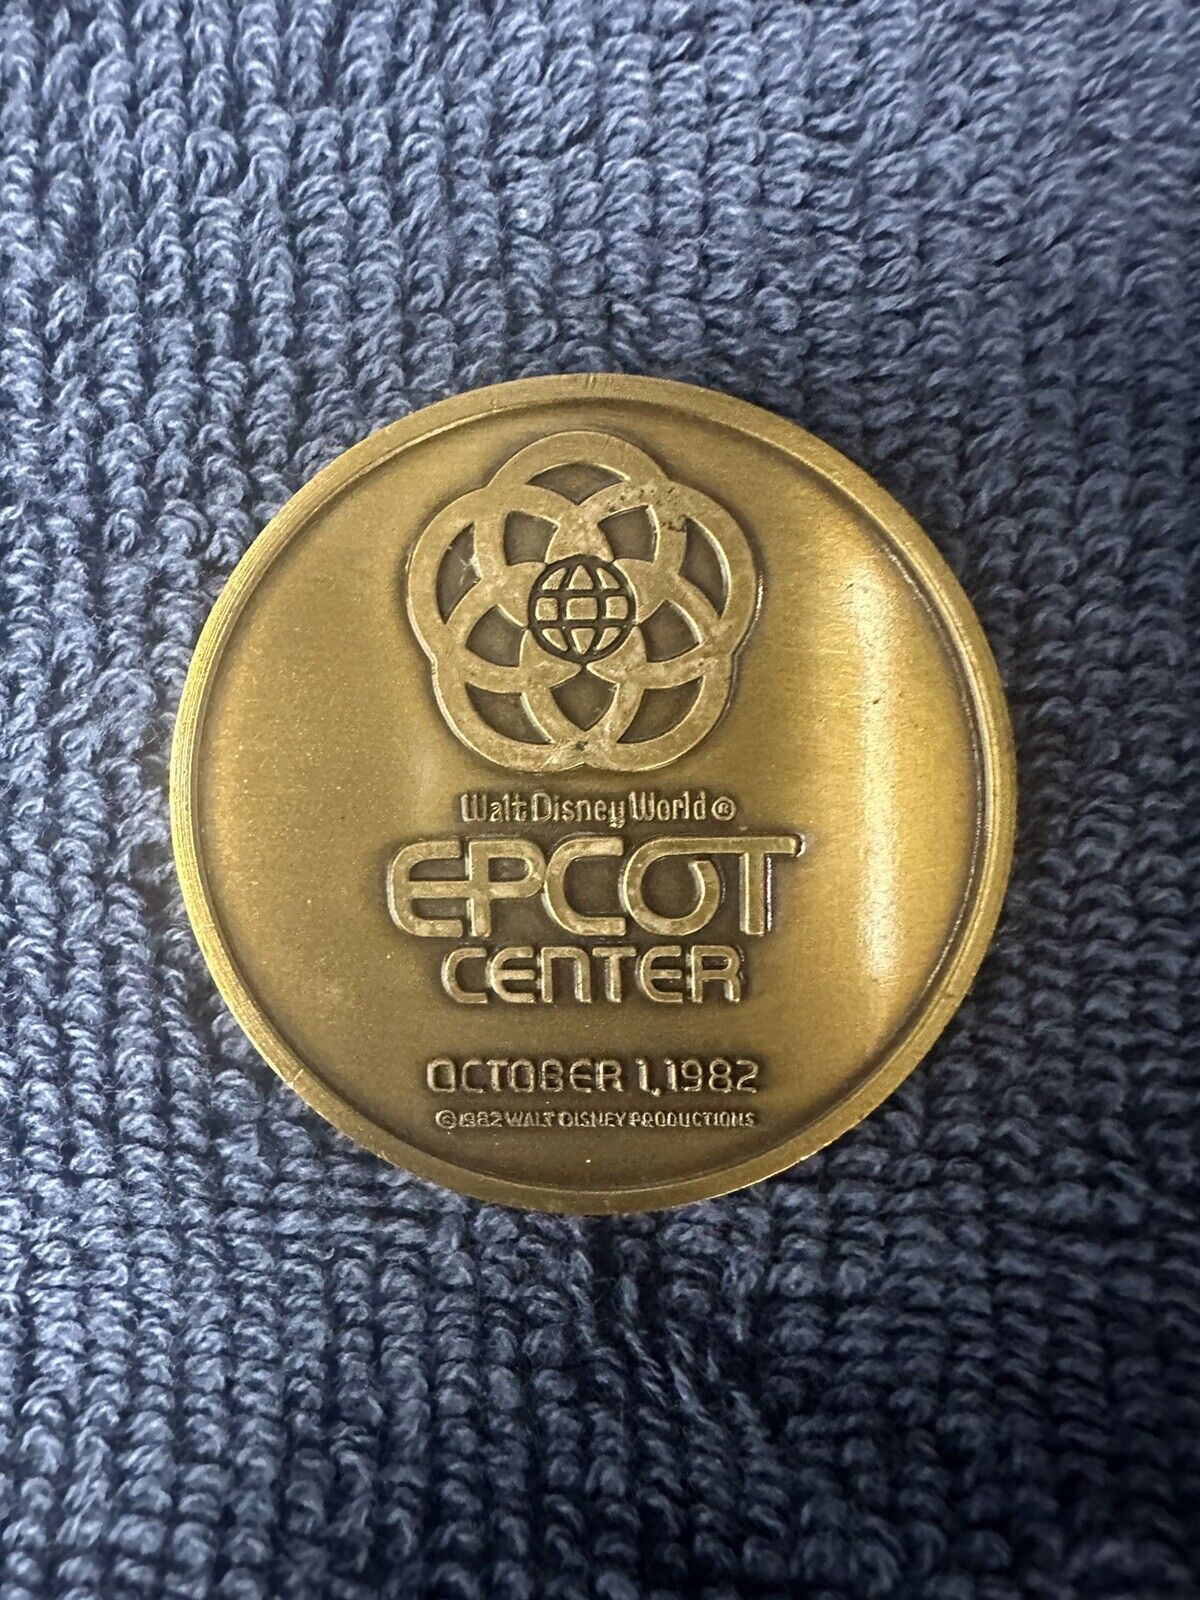 Epcot Center Grand Opening Cast-Exclusive Coin